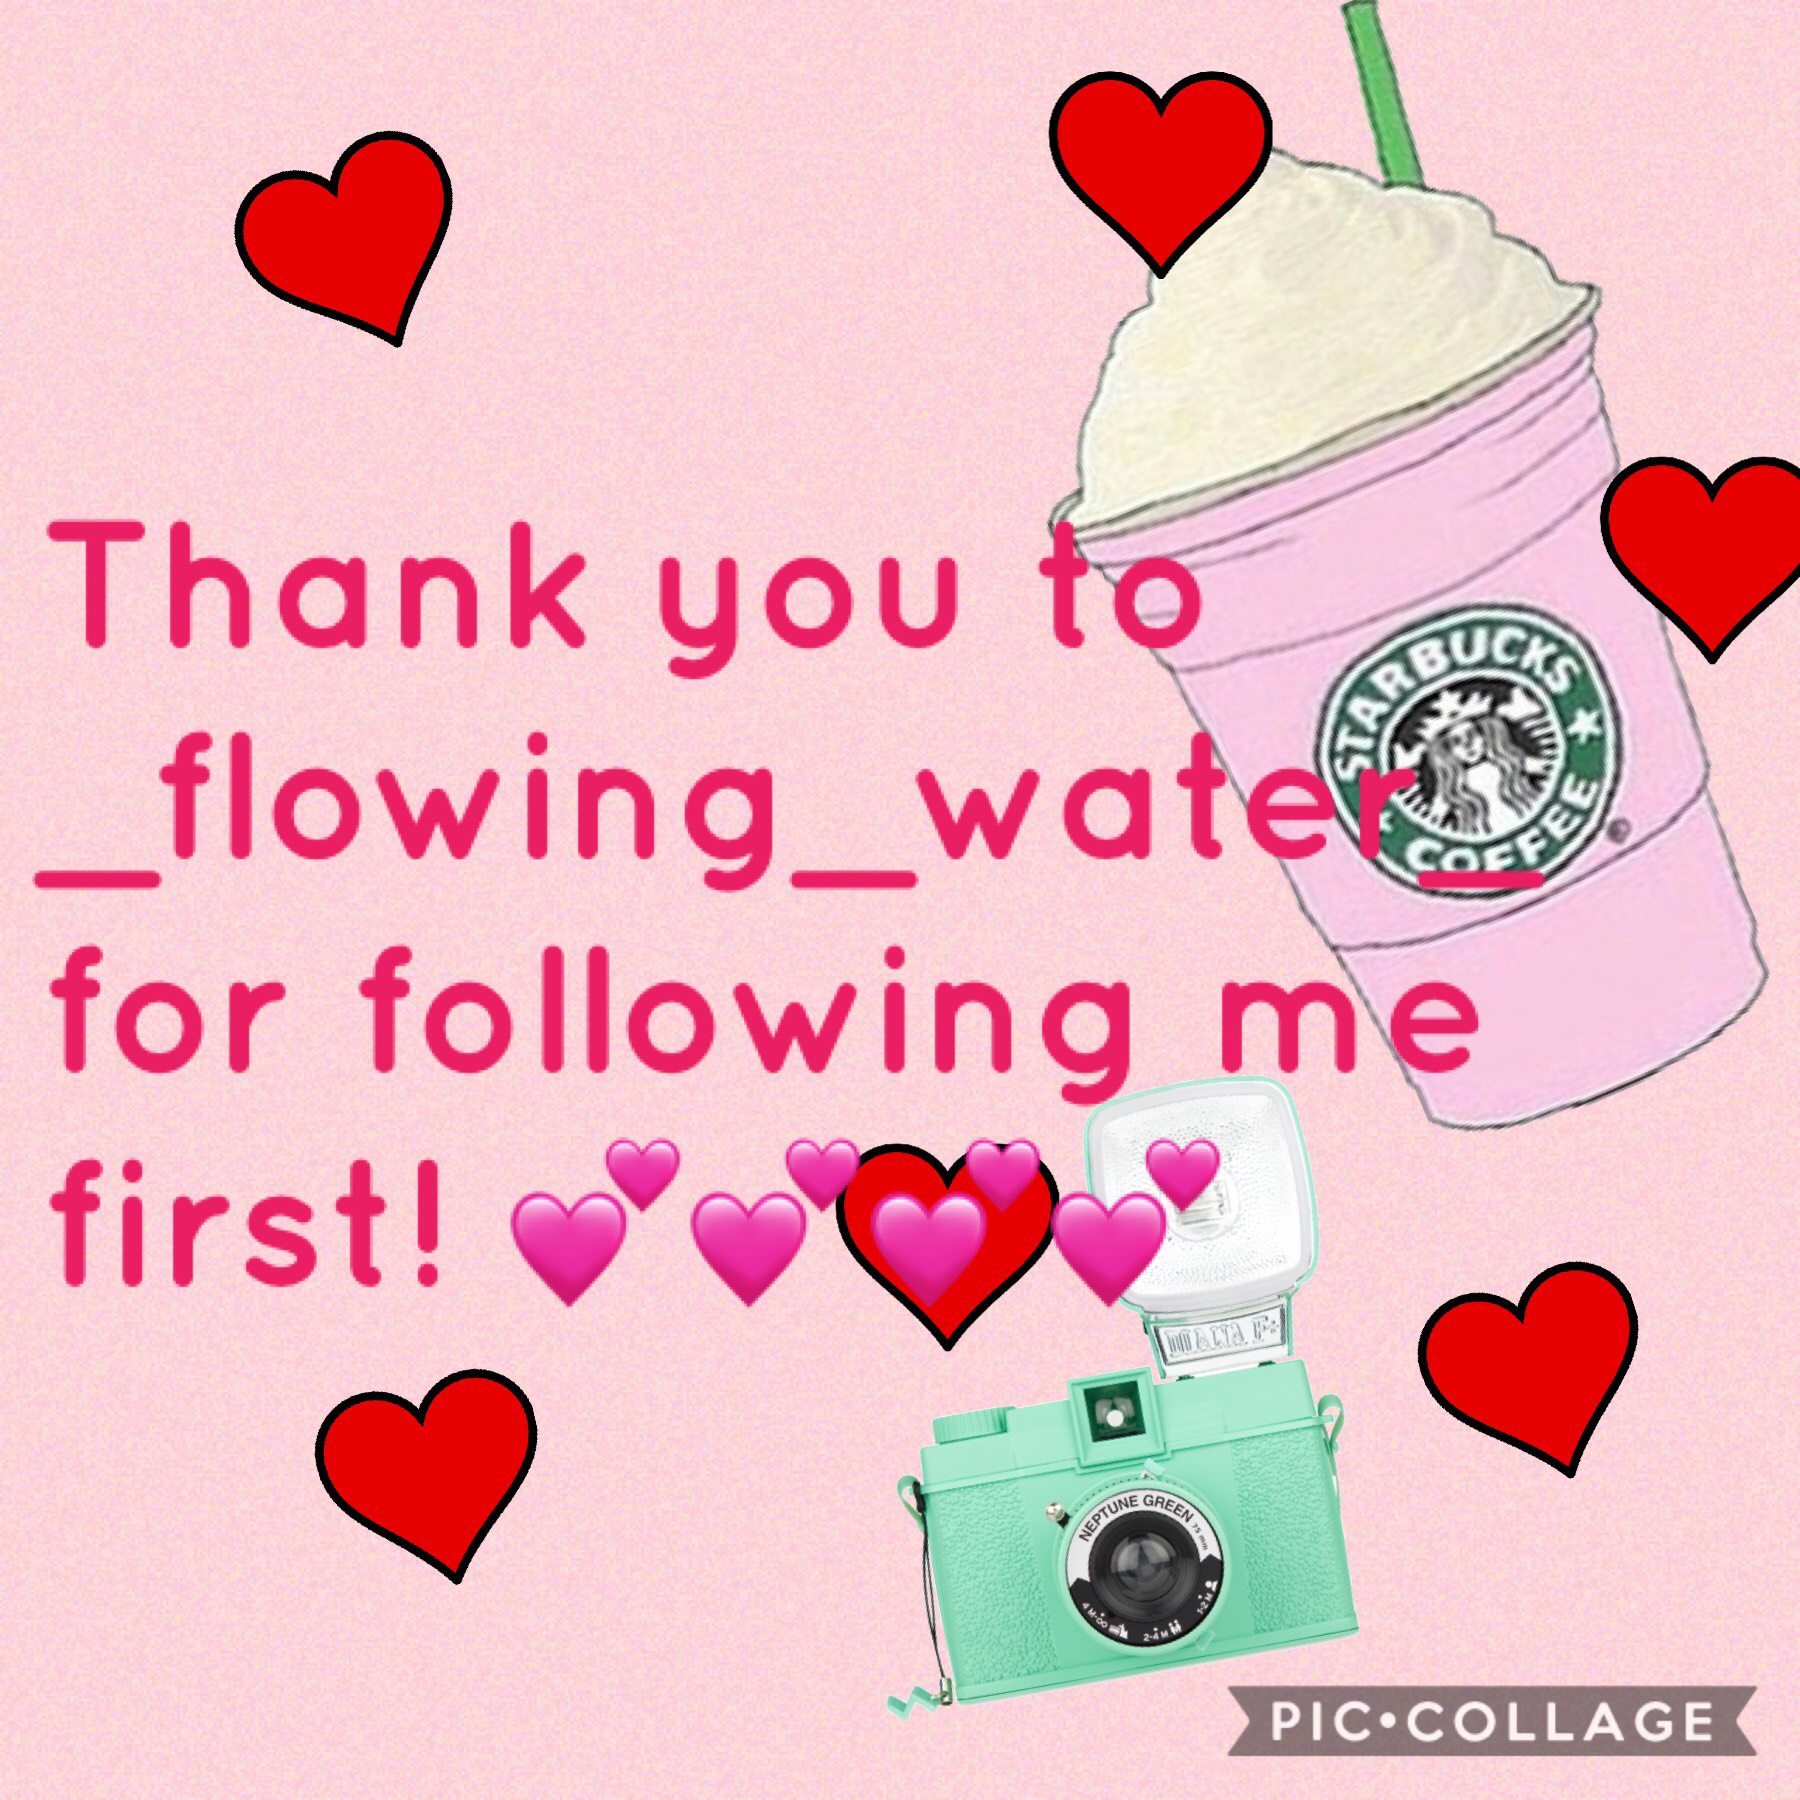 Please comment her and like her posts! #flowing #water #thankyou #follow #comment #like #starbucks #love heart #camera #pink